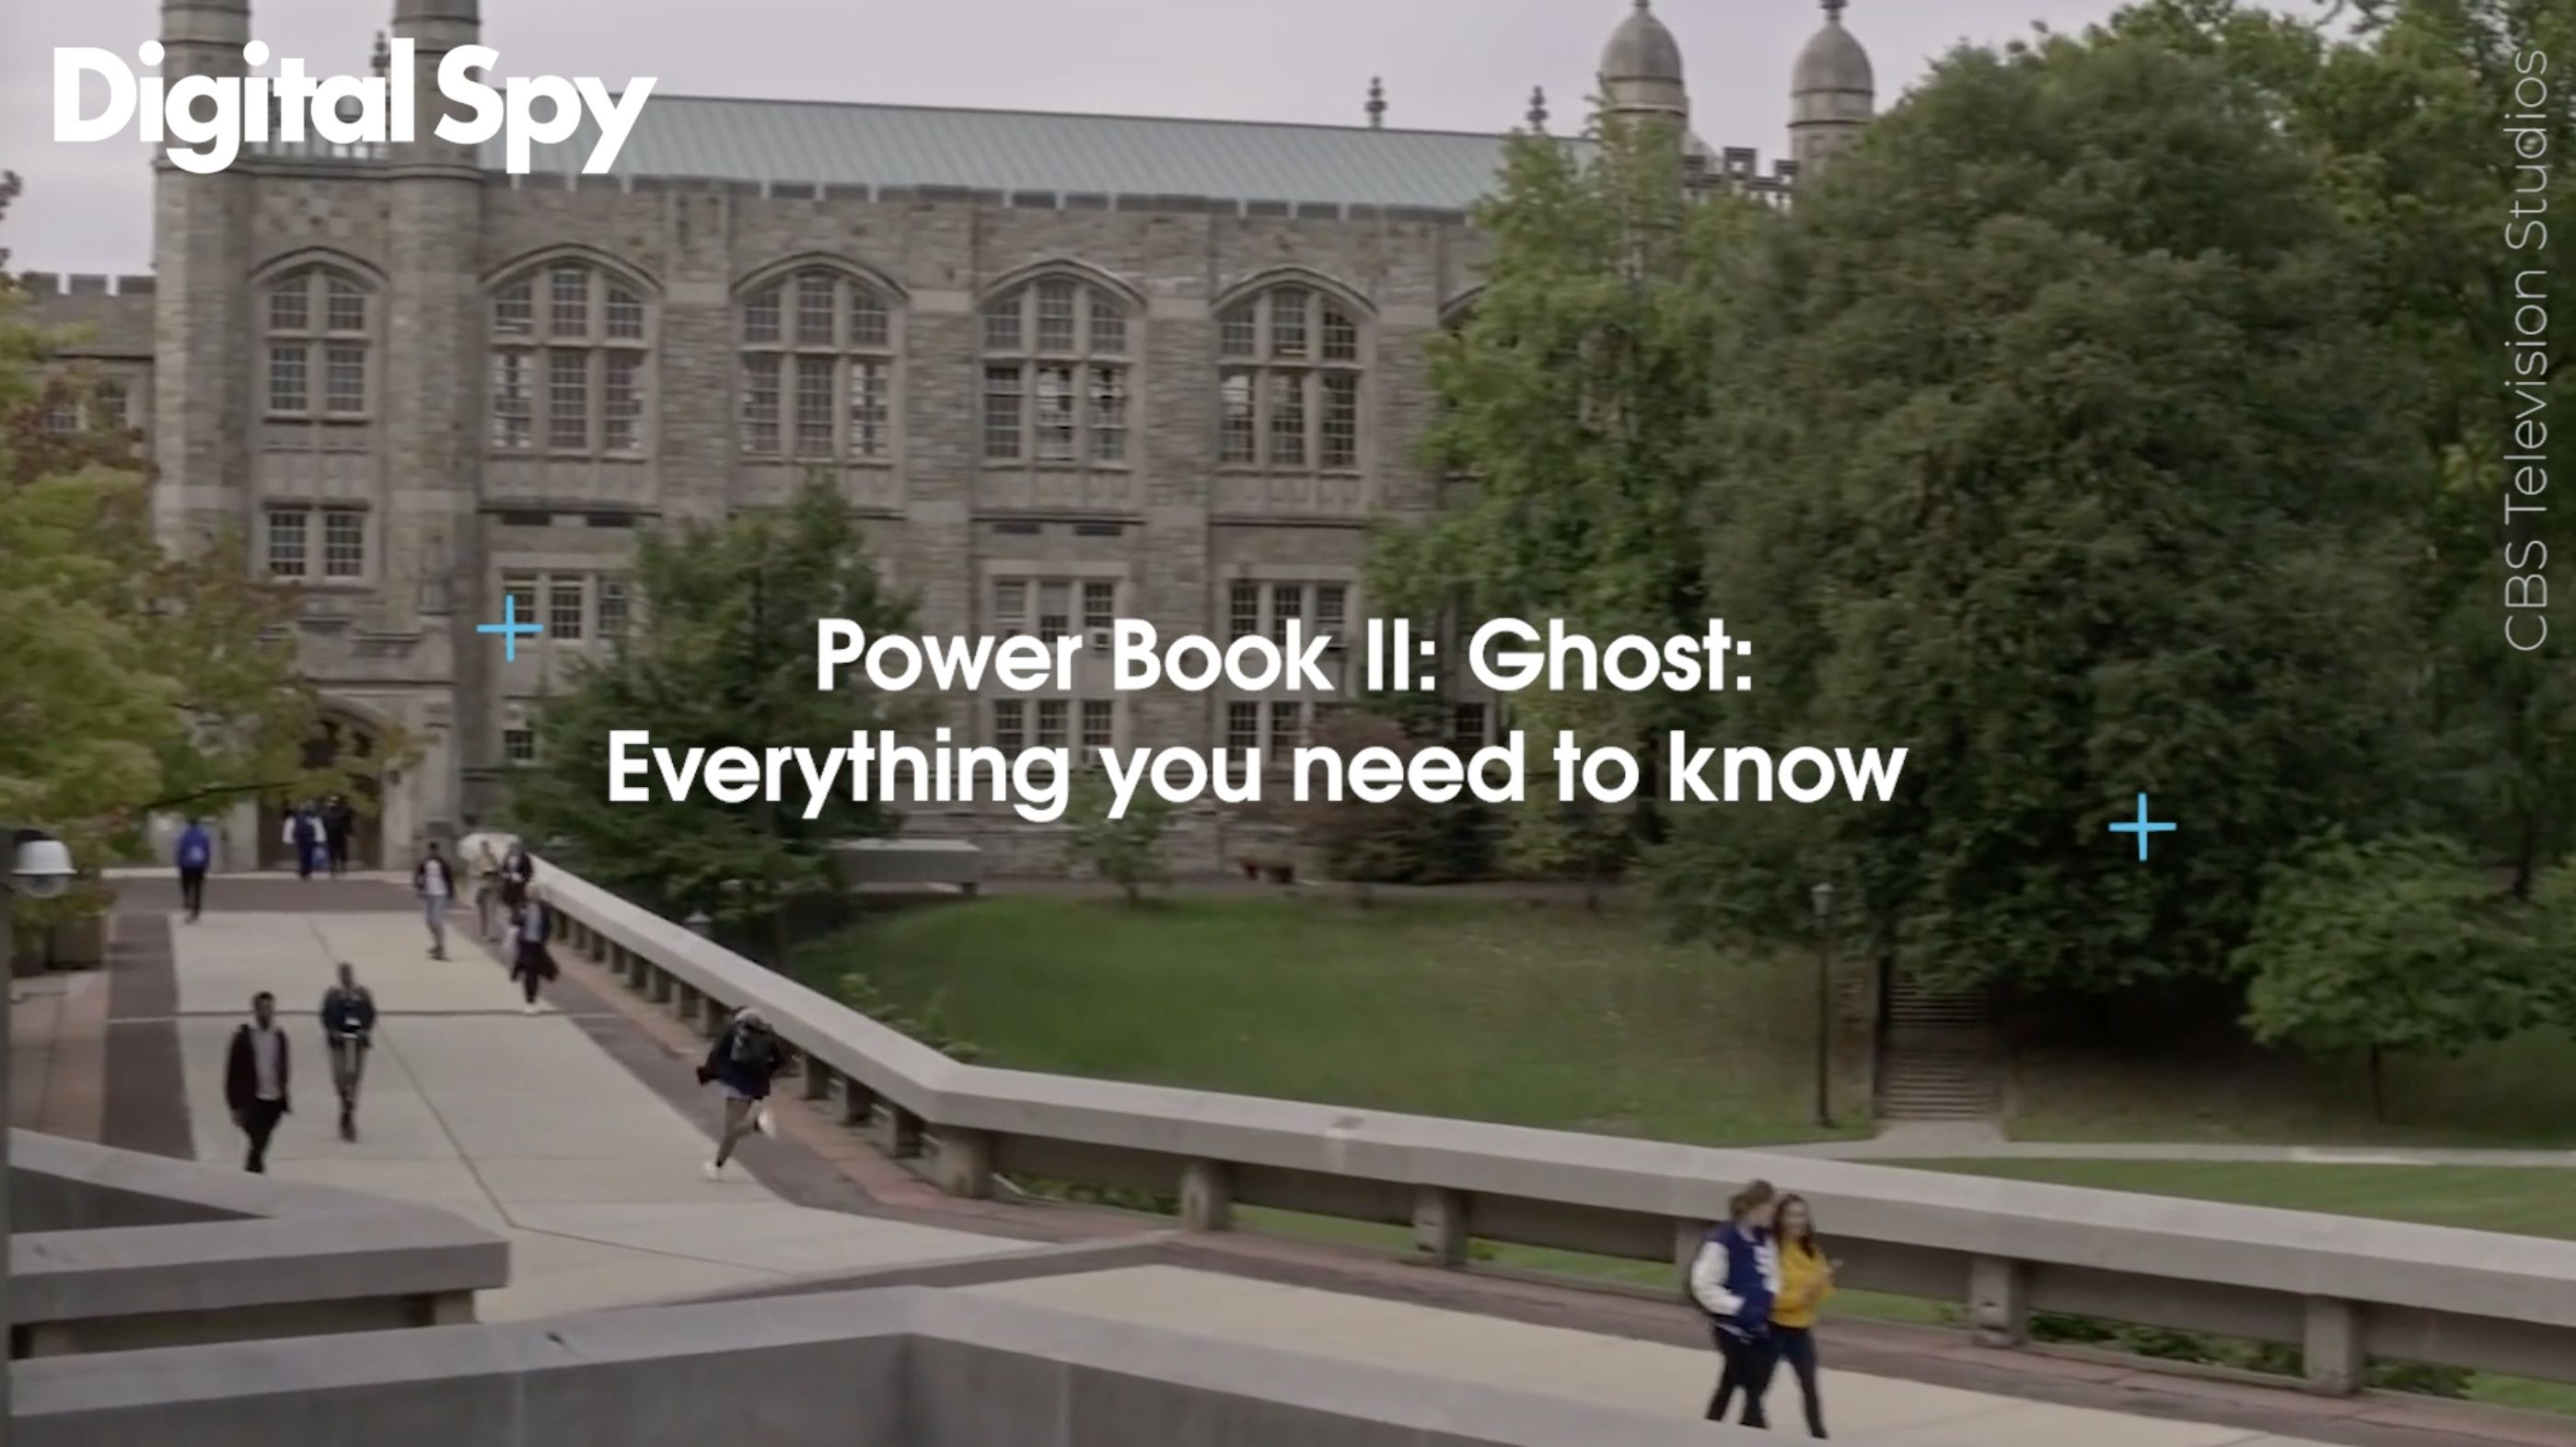 Power Book 2' Trailer: New Promo Reveals Spin-Off Release Date, Cast, Plot